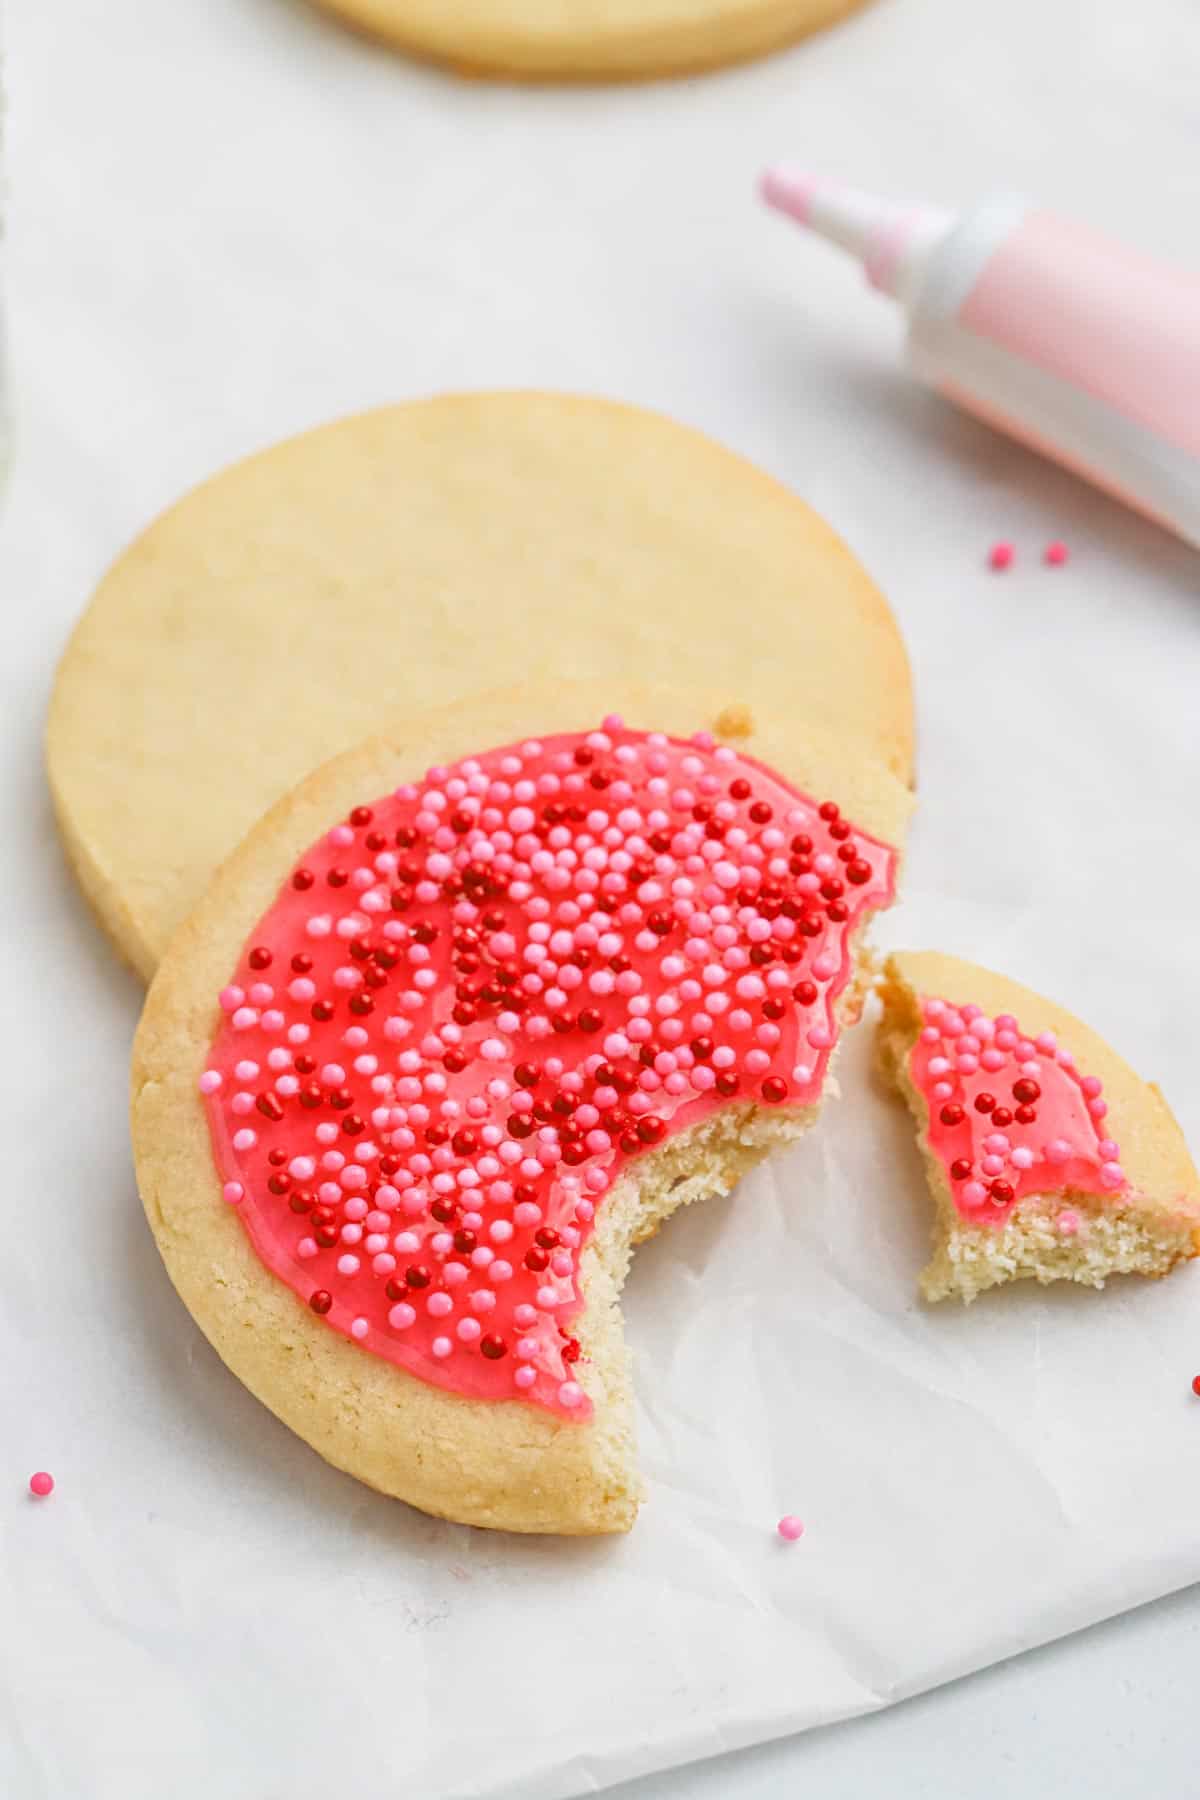 Delicious iced sugar cookies with a bite missing.